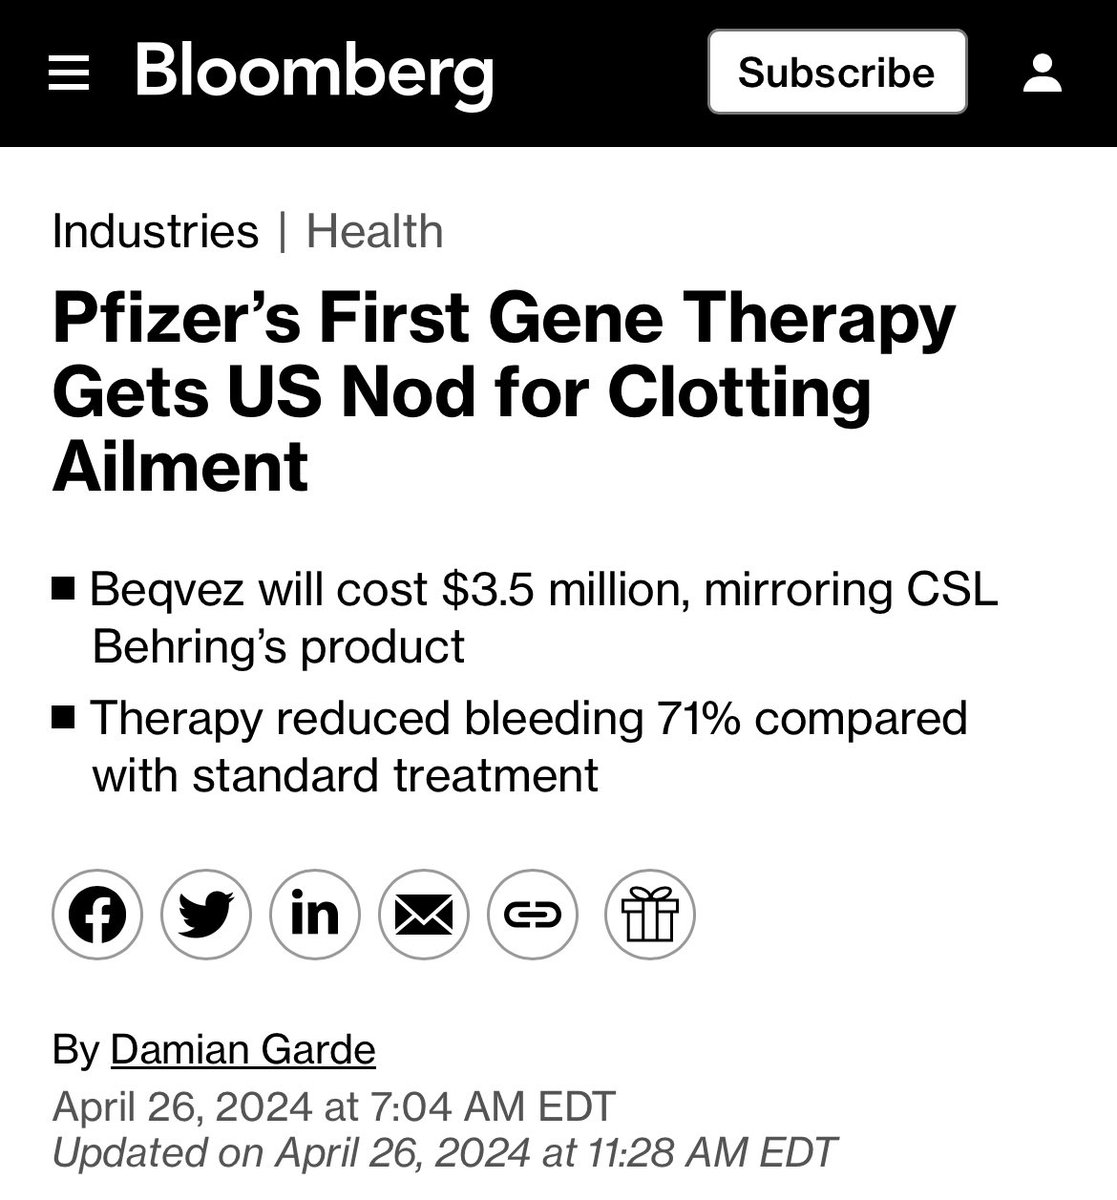 @WallStreetSilv I’m sure Pfizer buying a pharmaceutical company, after the rollout of the C19 shot, that specializes in cardiovascular treatments and medicine, as well as getting approval on their first “gene therapy” for blot clots, was just a mere coincidence.

It’s not about OUR collective…